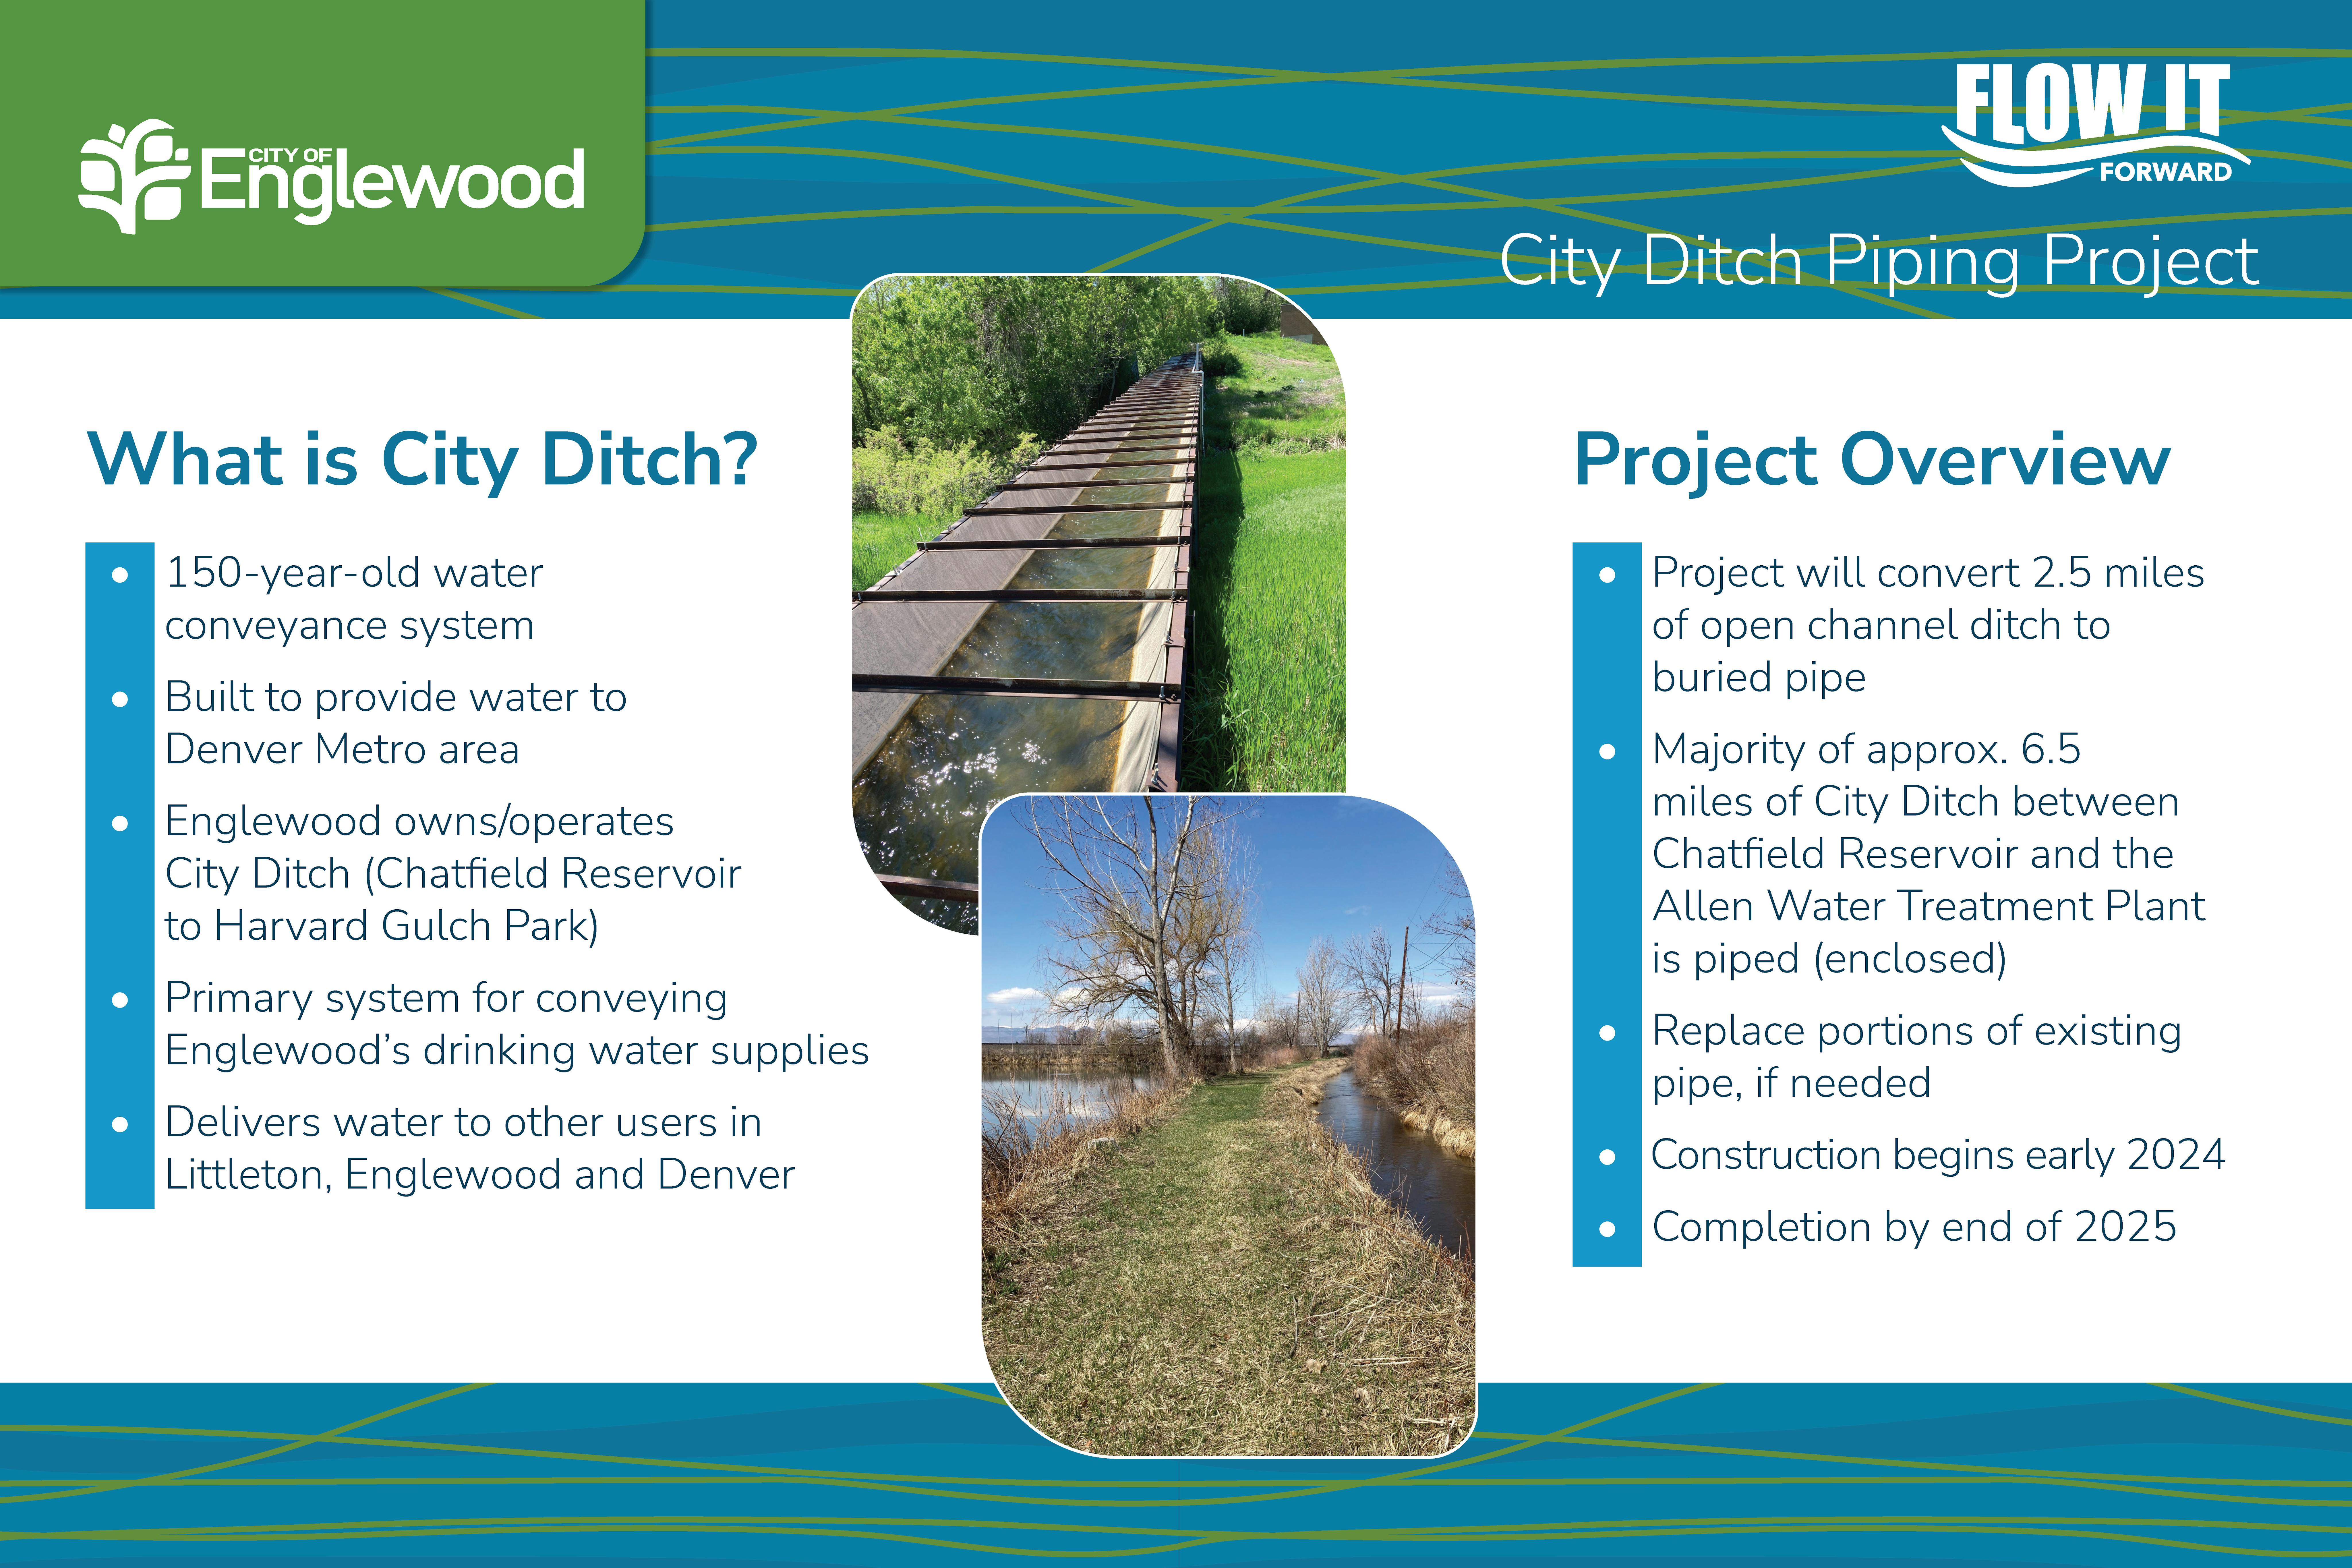 About the City Ditch Piping Project